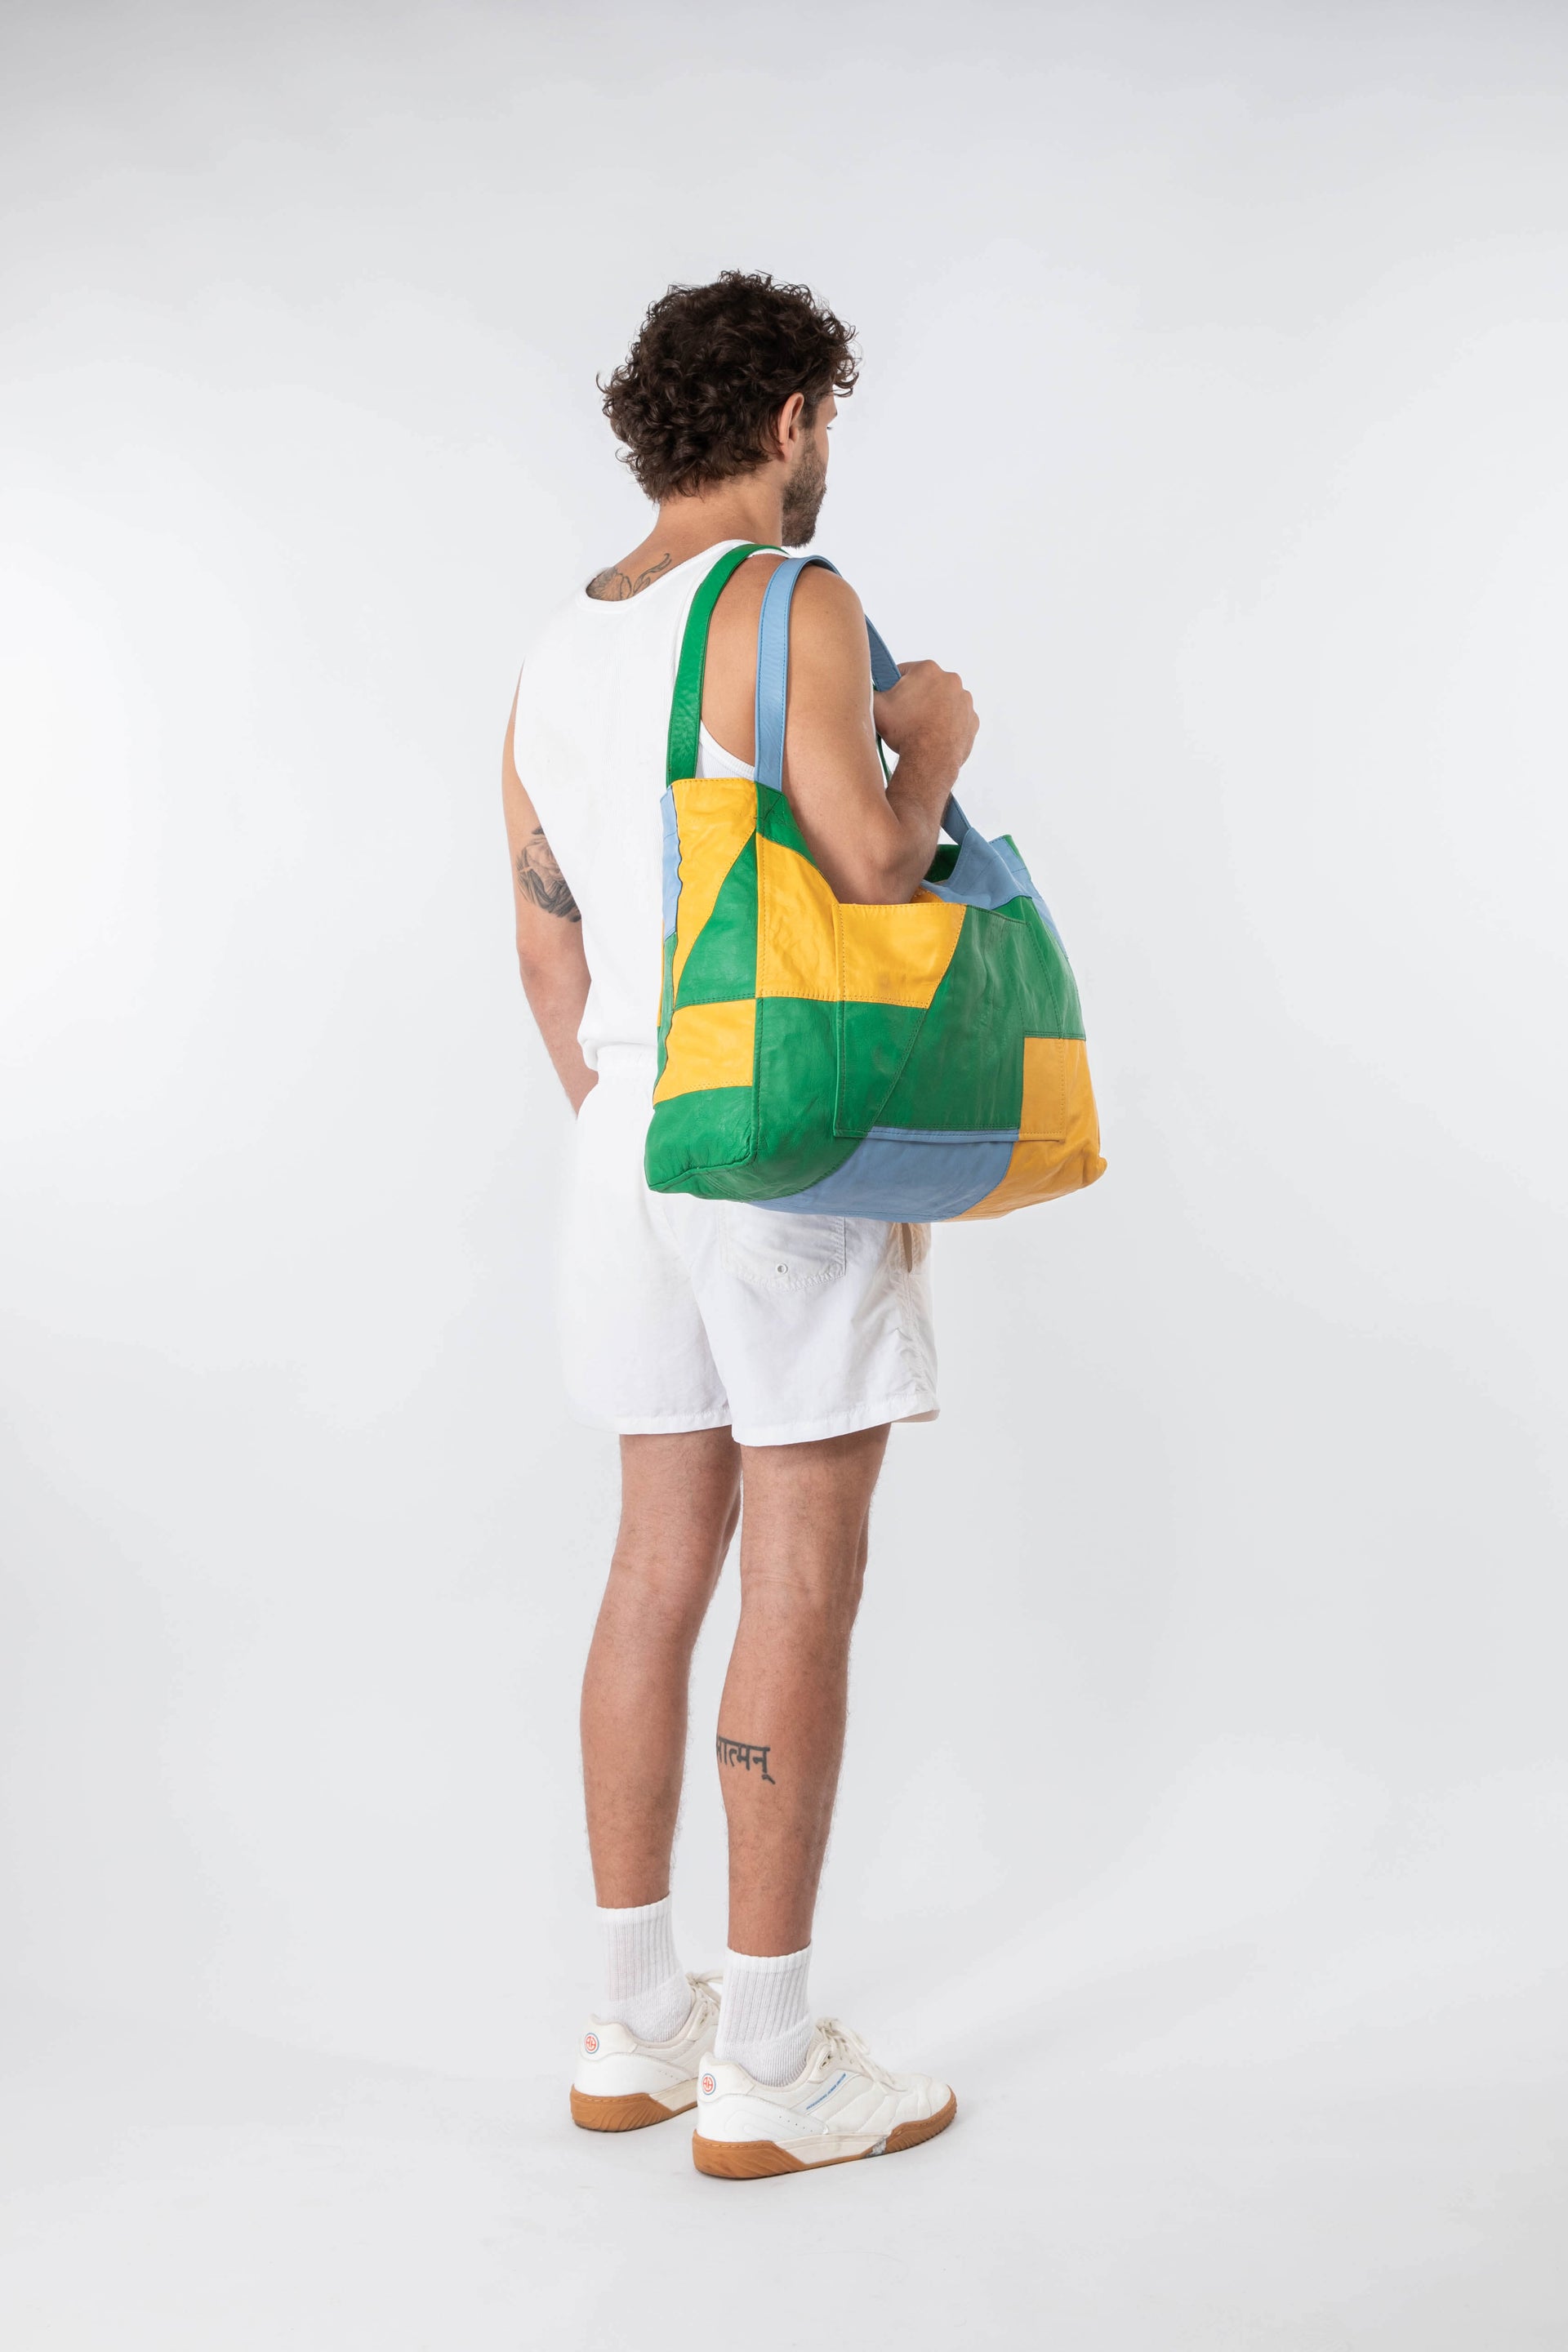 Up-cycled Patchwork Soft Leather Maxi Tote Green / Yellow / Blue